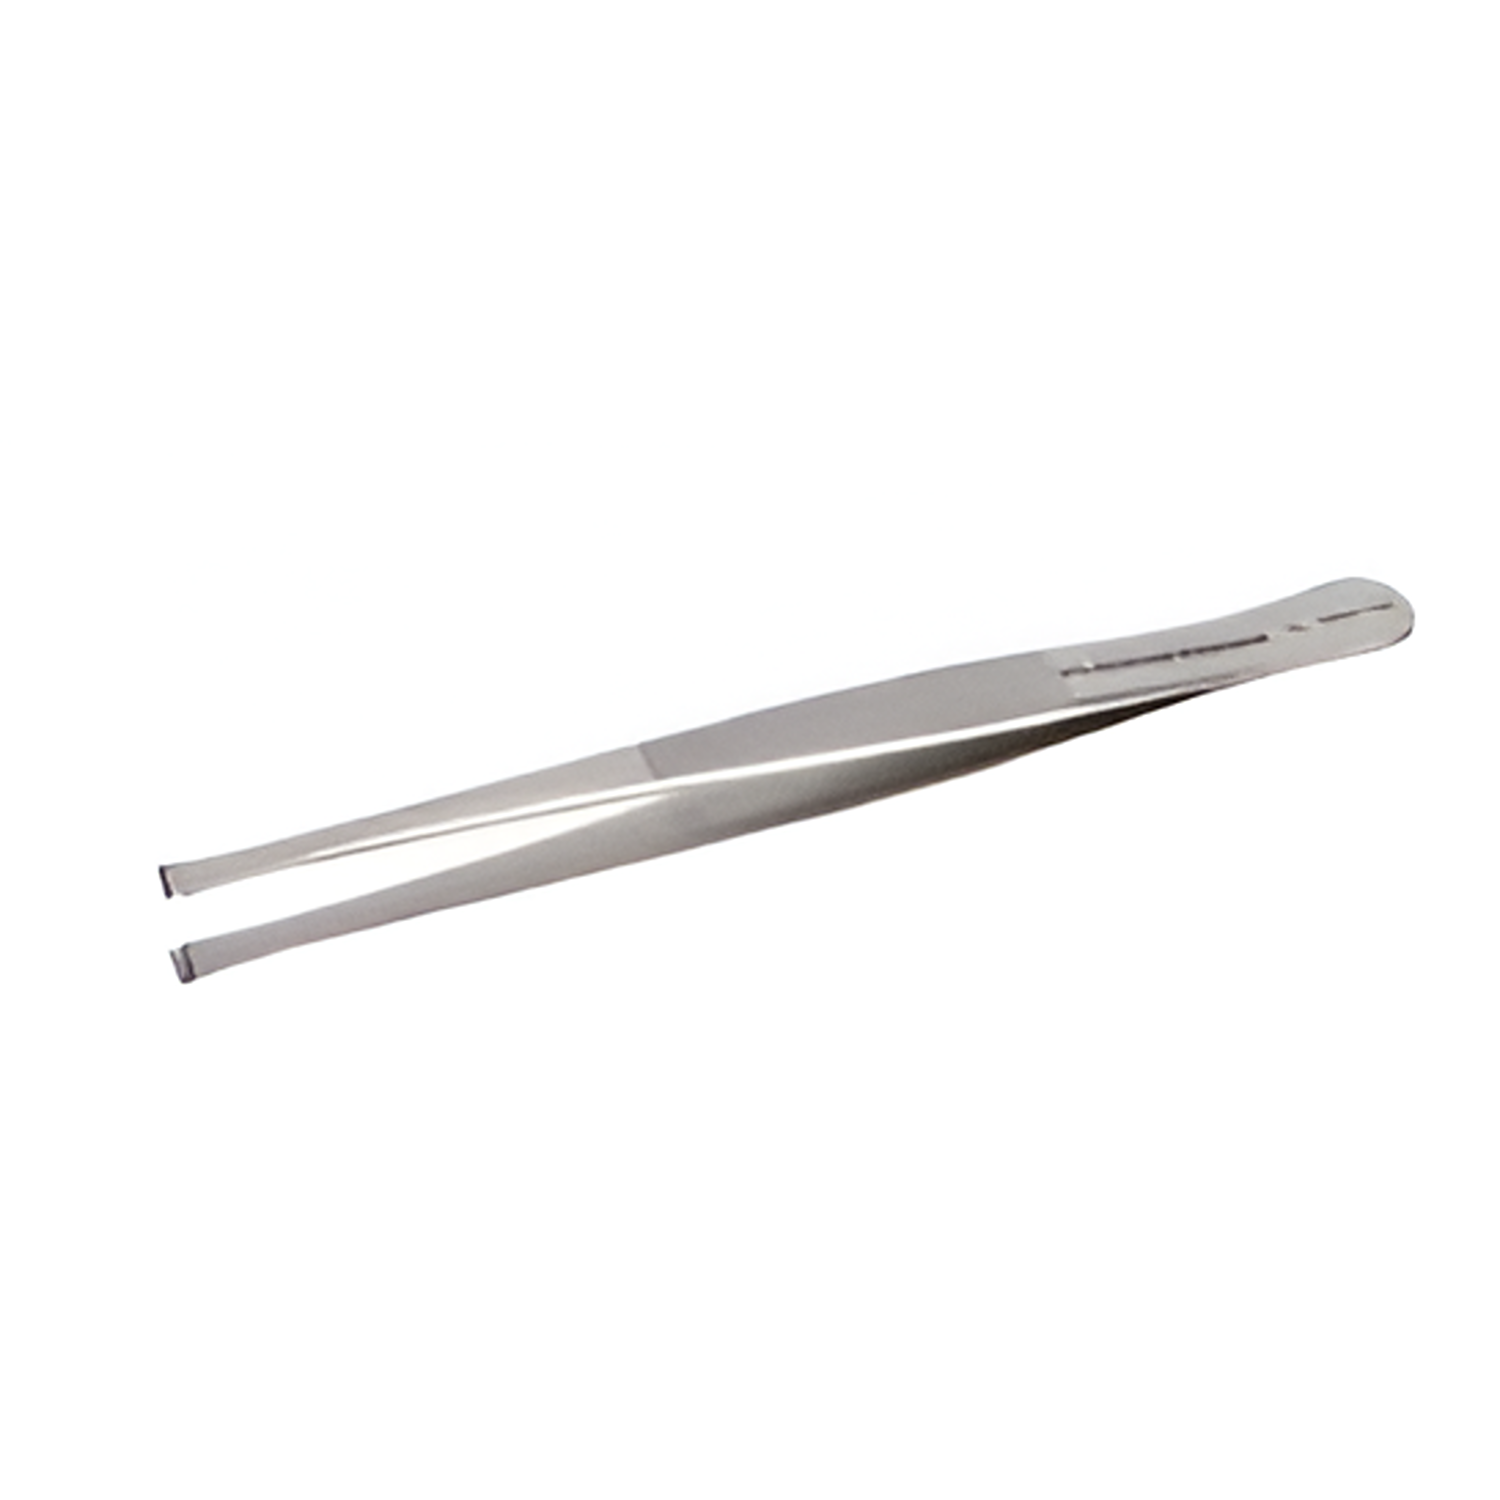 BAHCO TL 582-SA Tweezers with 4 mm 90° Angled Tips (BAHCO Tools) - Premium Tweezers from BAHCO - Shop now at Yew Aik.